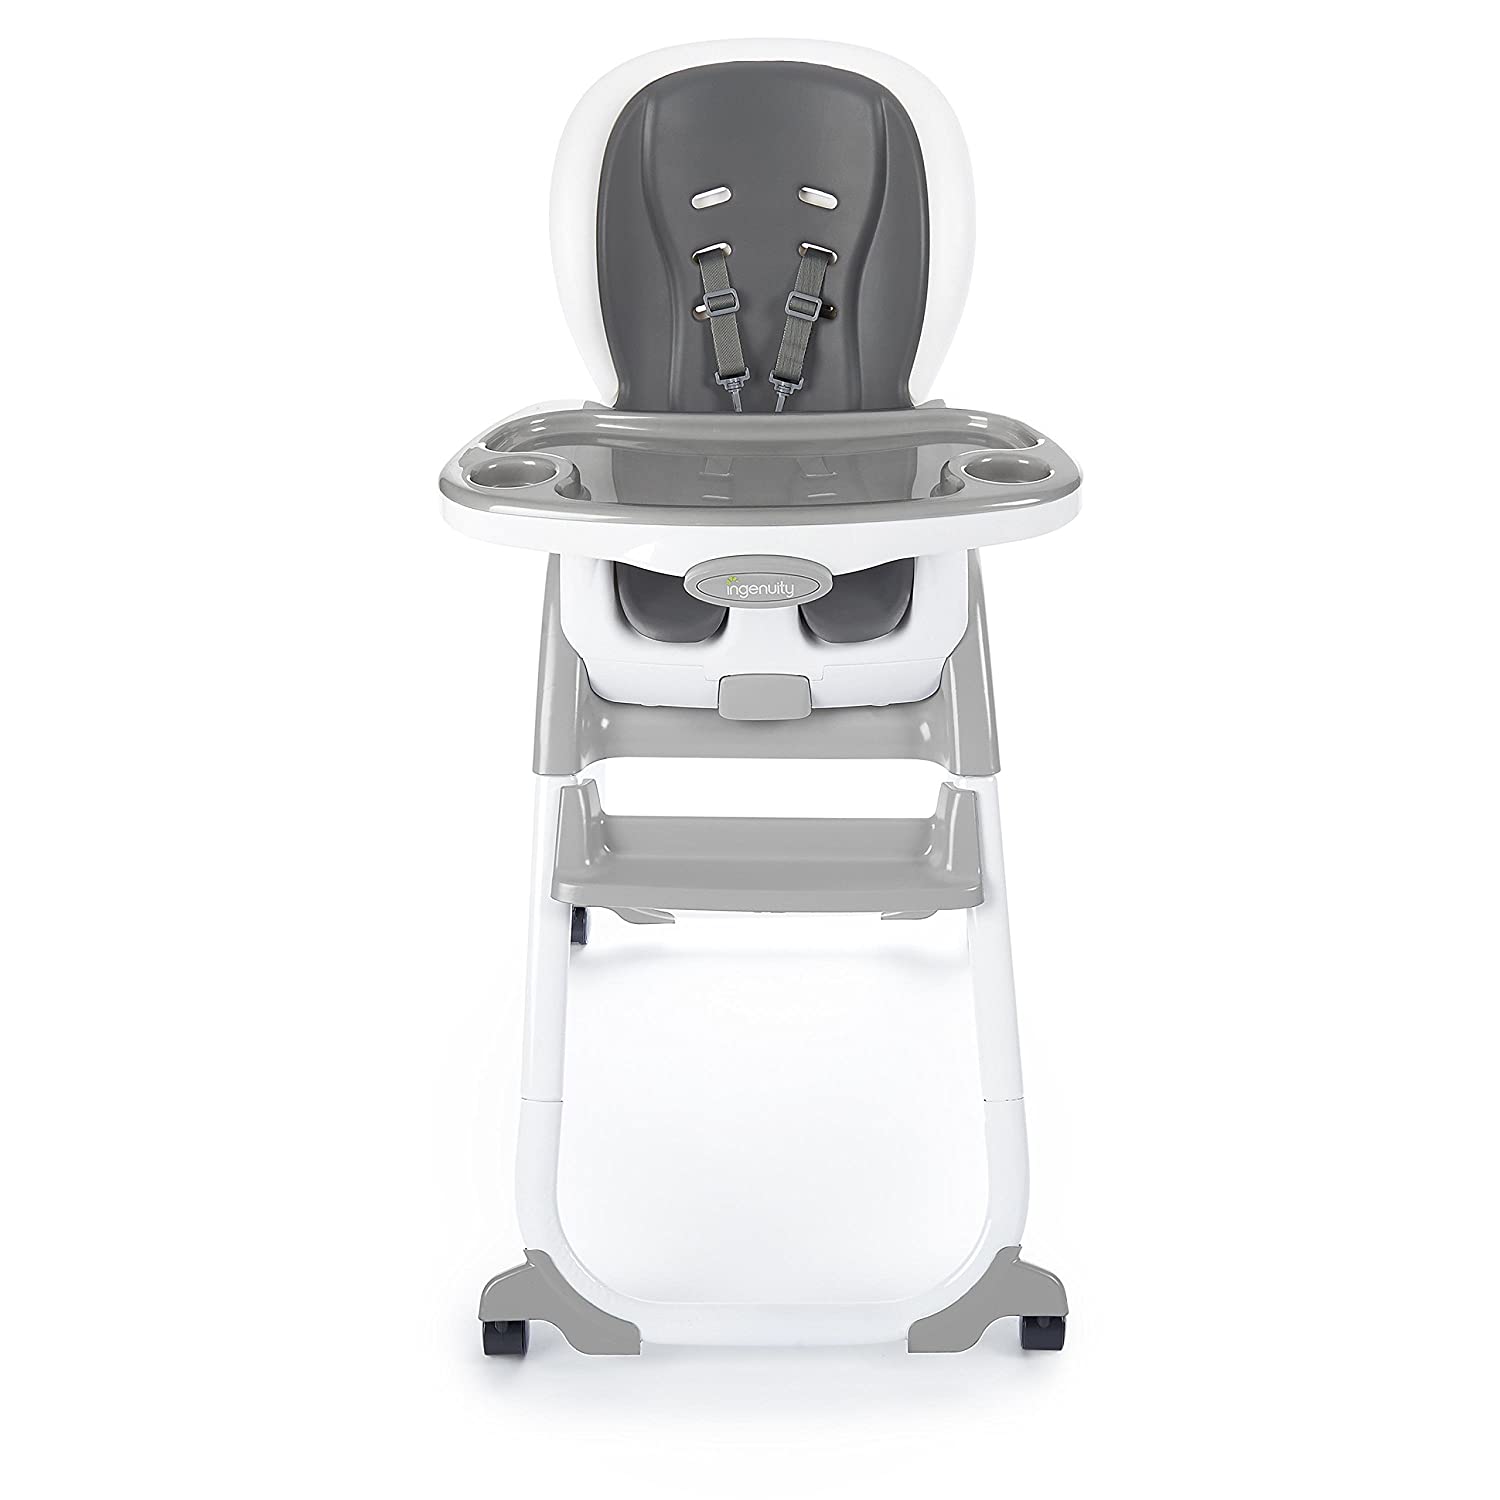 https://bigbigmart.com/wp-content/uploads/2023/05/Ingenuity-SmartClean-Trio-Elite-3-in-1-Convertible-Baby-High-Chair-Toddler-Chair-and-Dining-Booster-Seat-Slate.jpg